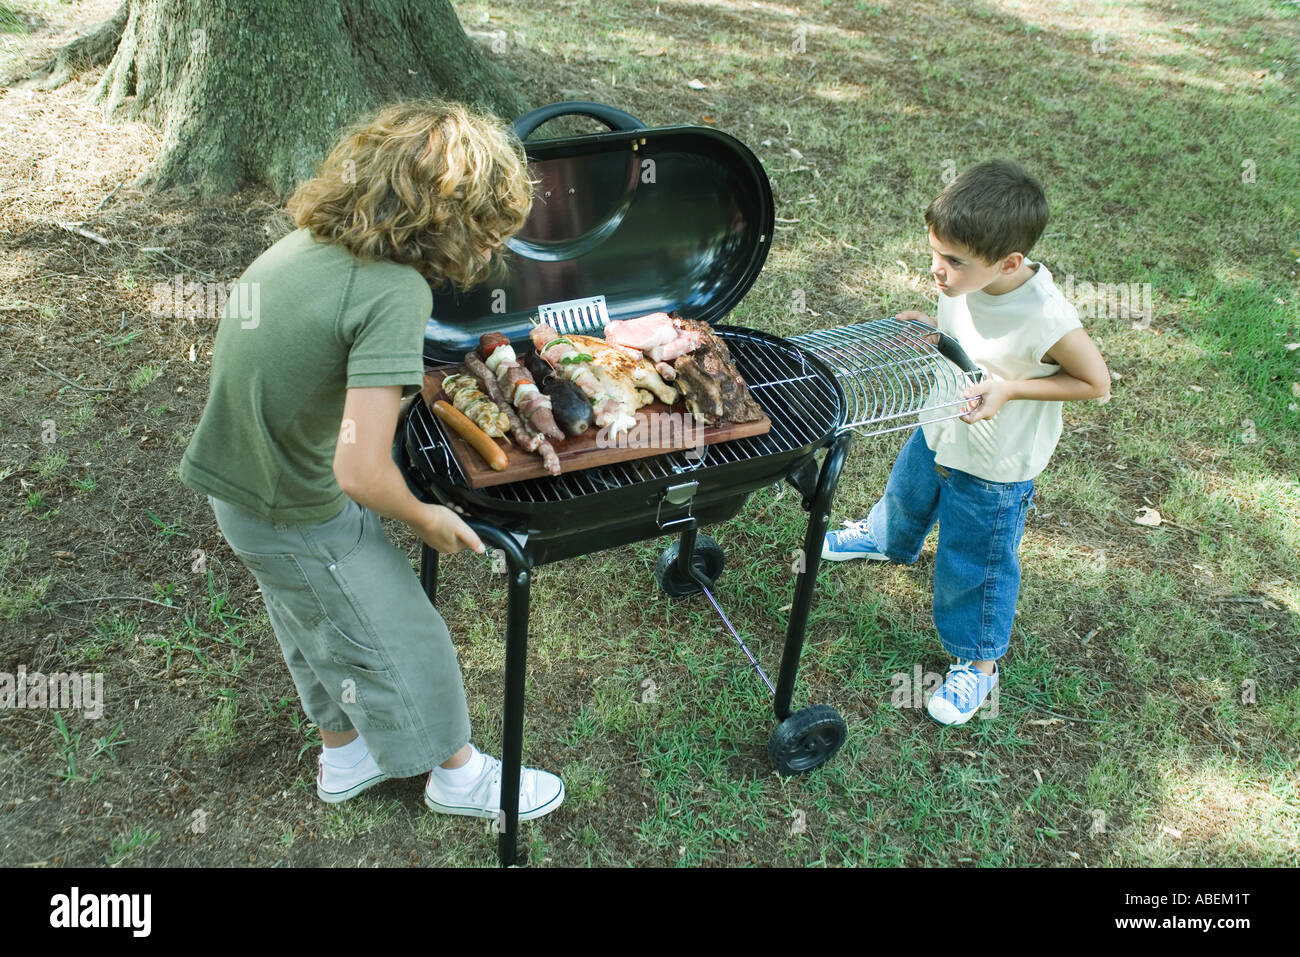 Two boys standing next to tray of grilled meat on barbecue Stock Photo